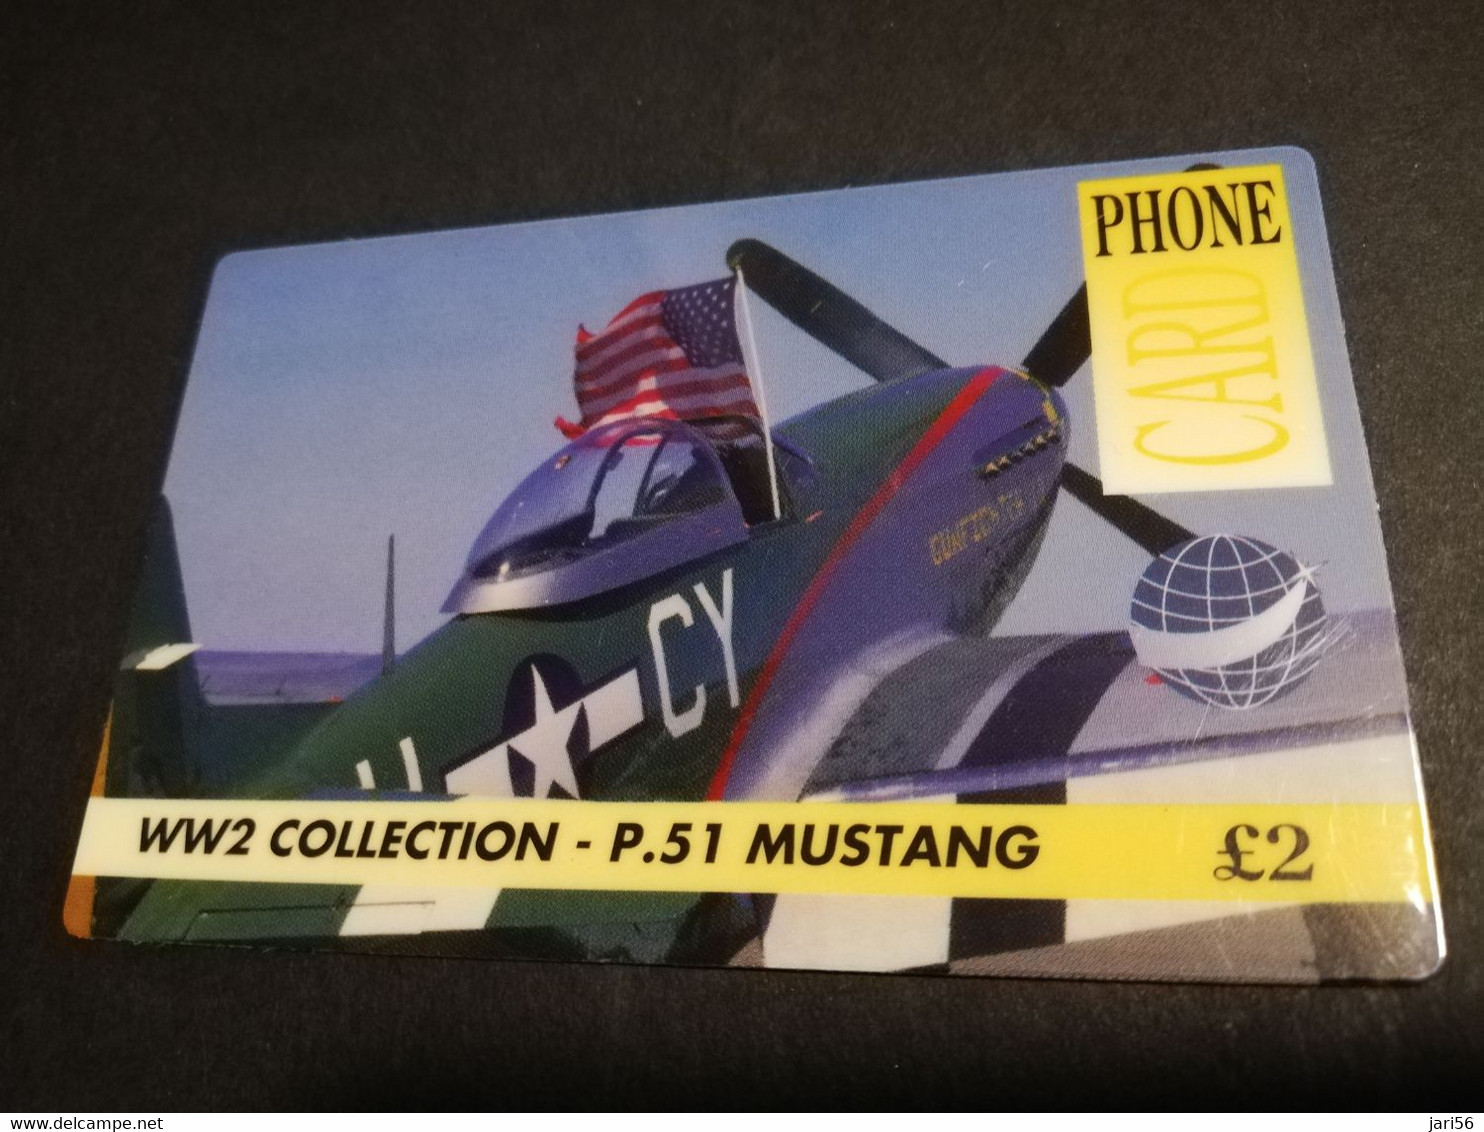 GREAT BRITAIN   3 POUND  AIR PLANES  P-51 MUSTANG   DIT PHONECARD    PREPAID CARD      **5918** - [10] Colecciones